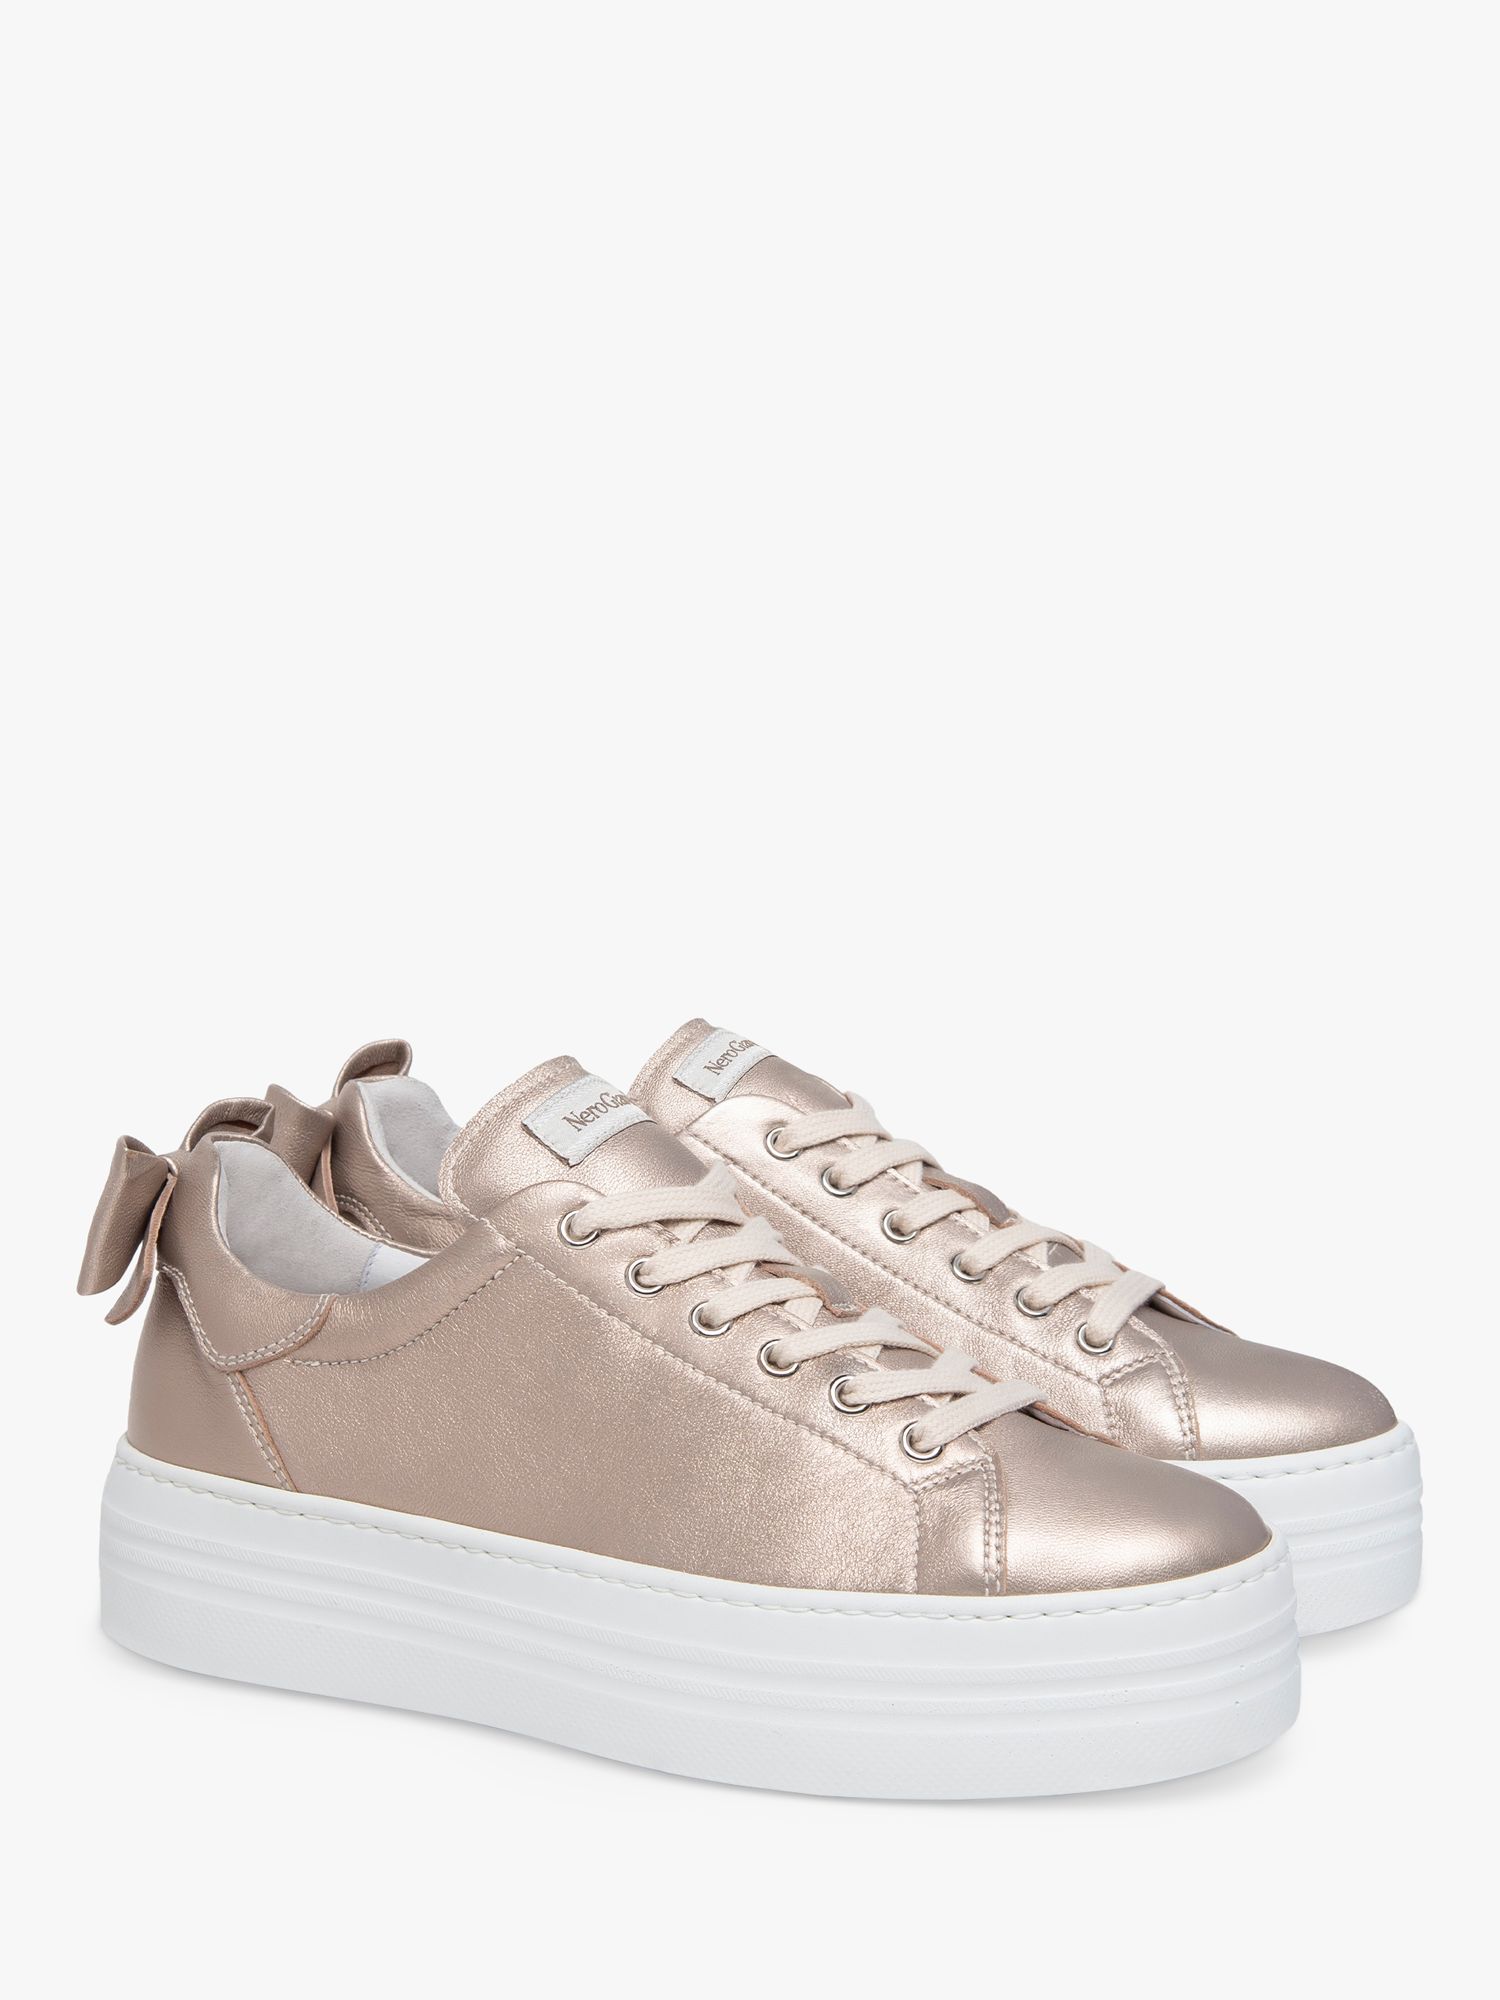 Buy NeroGiardini Bow Leather Trainers, Gold Online at johnlewis.com